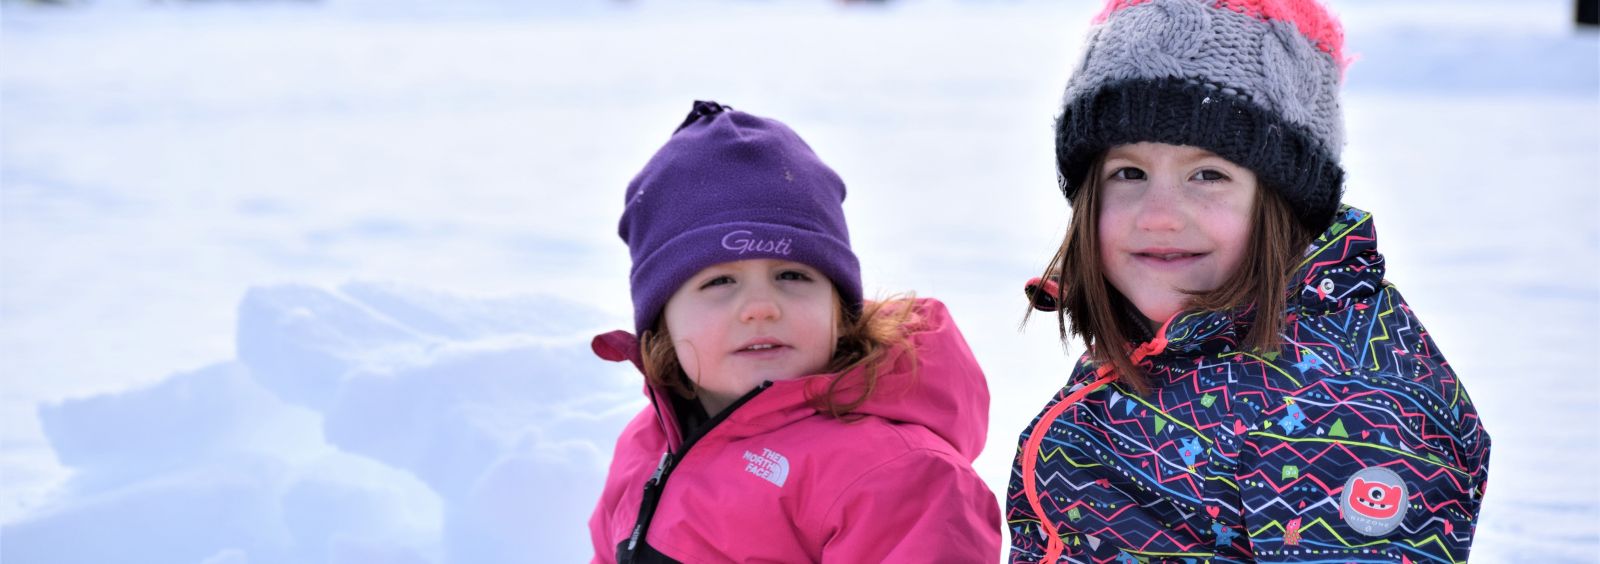 Two young children smiling in winter clothing with snow behind them.